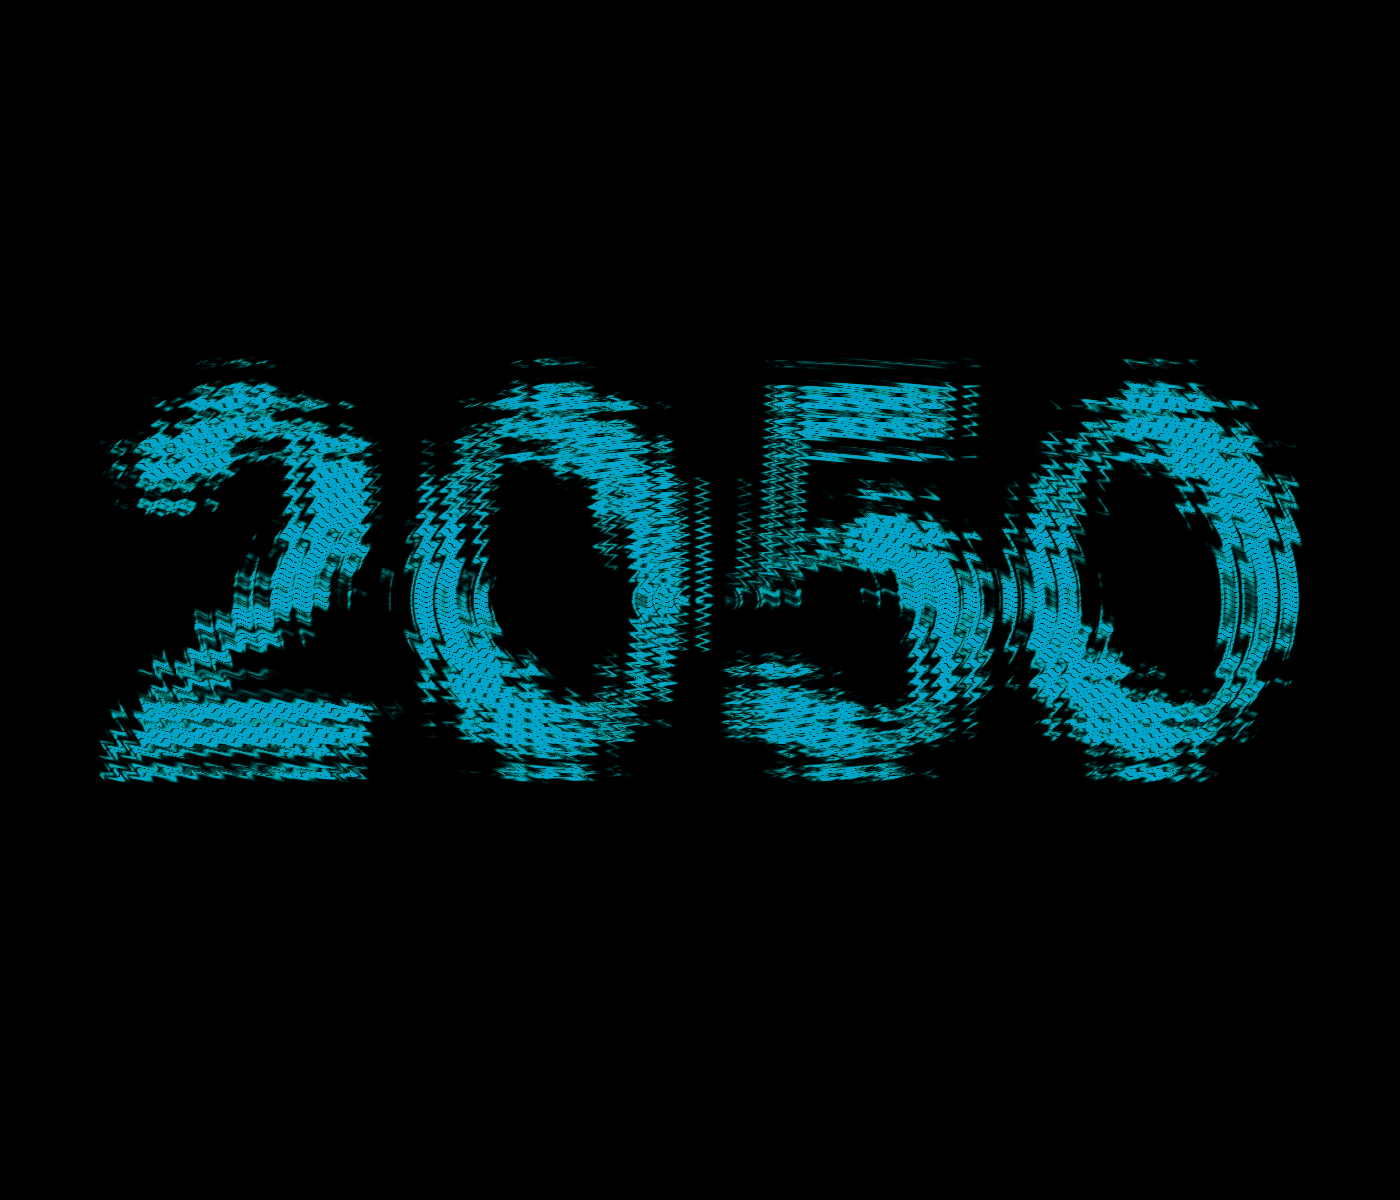 More work underway for 2050!